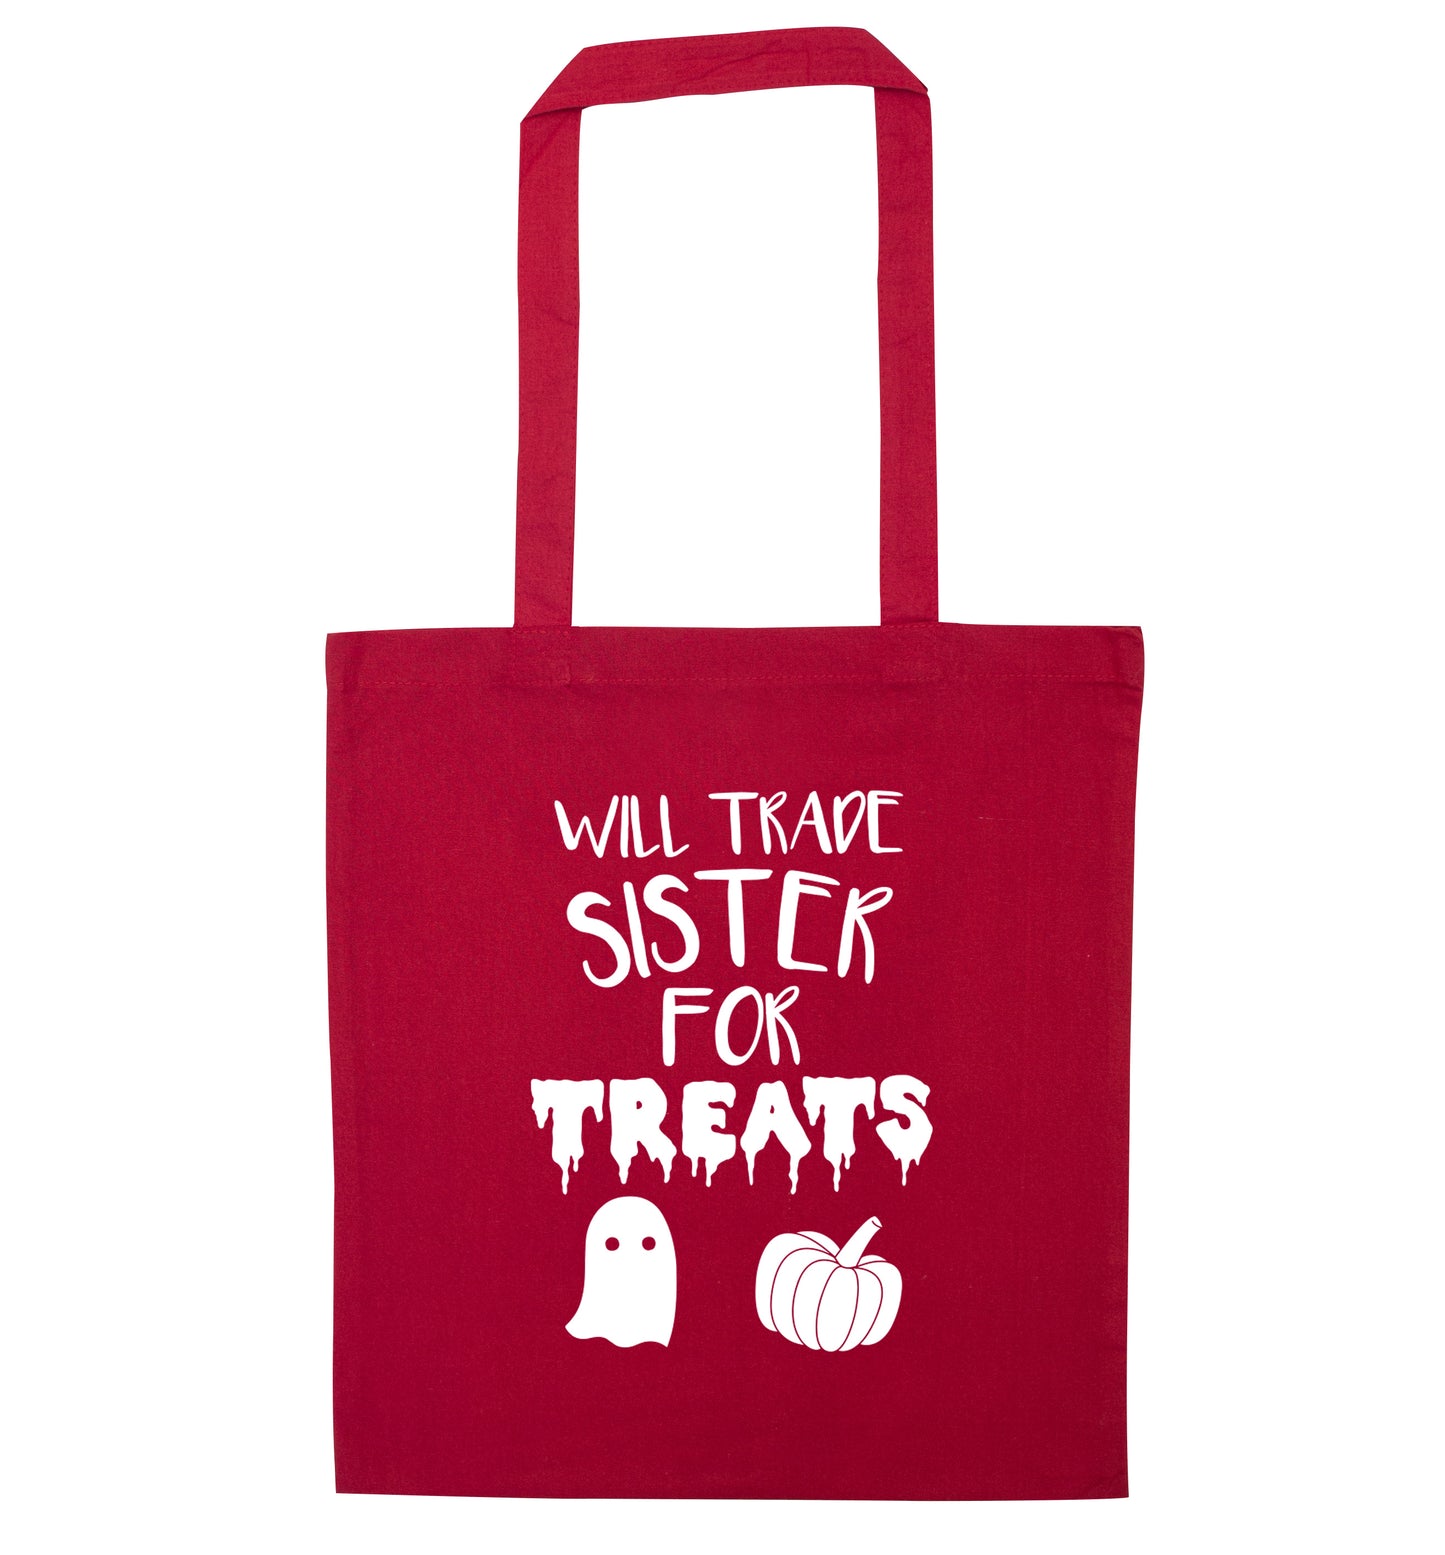 Will trade sister for sweets red tote bag